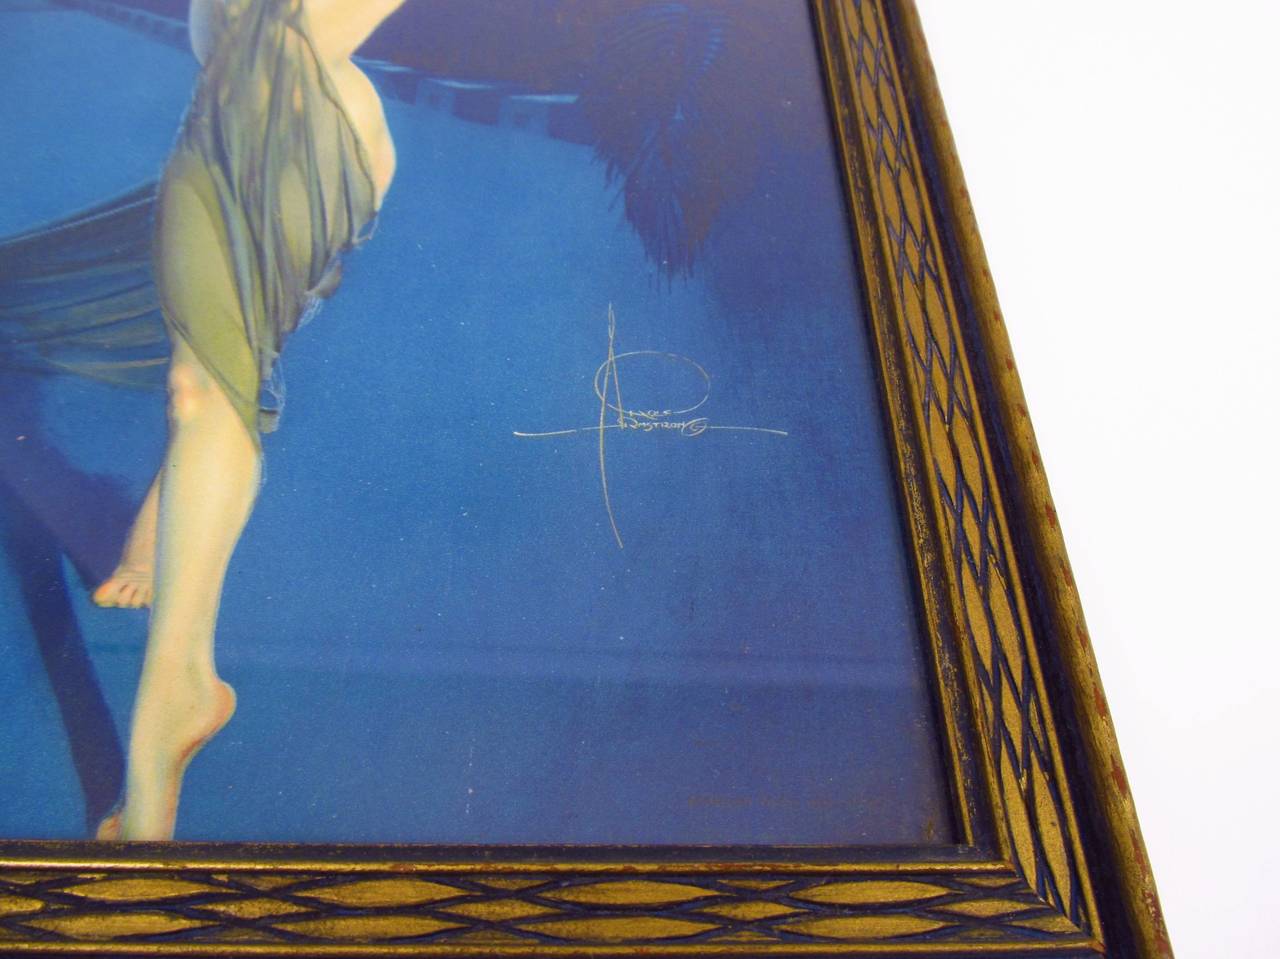 Not often found in this perfectly preserved condition. Original framing from the 1930s in a Classic blue and gold frame. Rolf Armstrong (1889-1960) was one of the most important pin-up artists of the 1930s. His prints are very collectible and sought